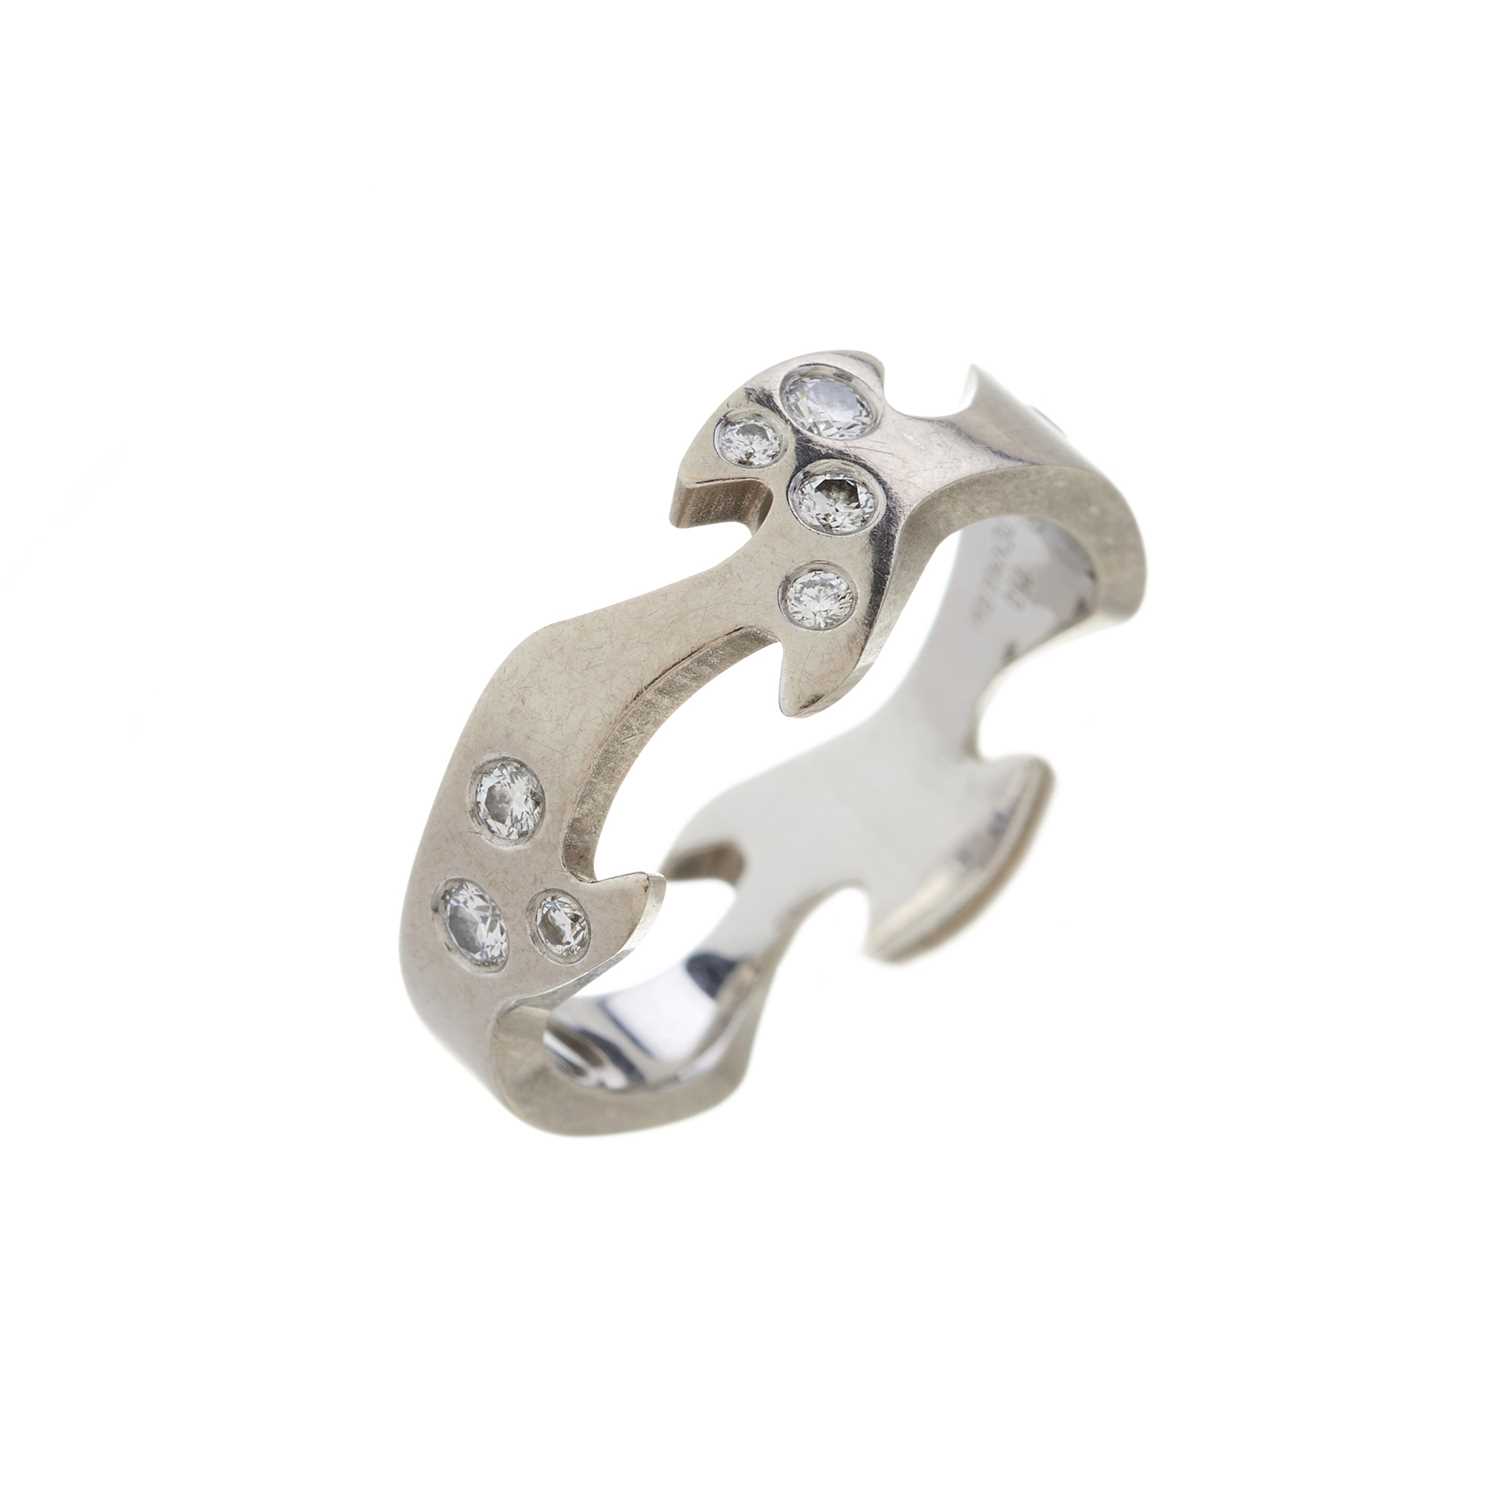 Georg Jensen, an 18ct tri-colour gold diamond Fusion puzzle ring - Image 2 of 4